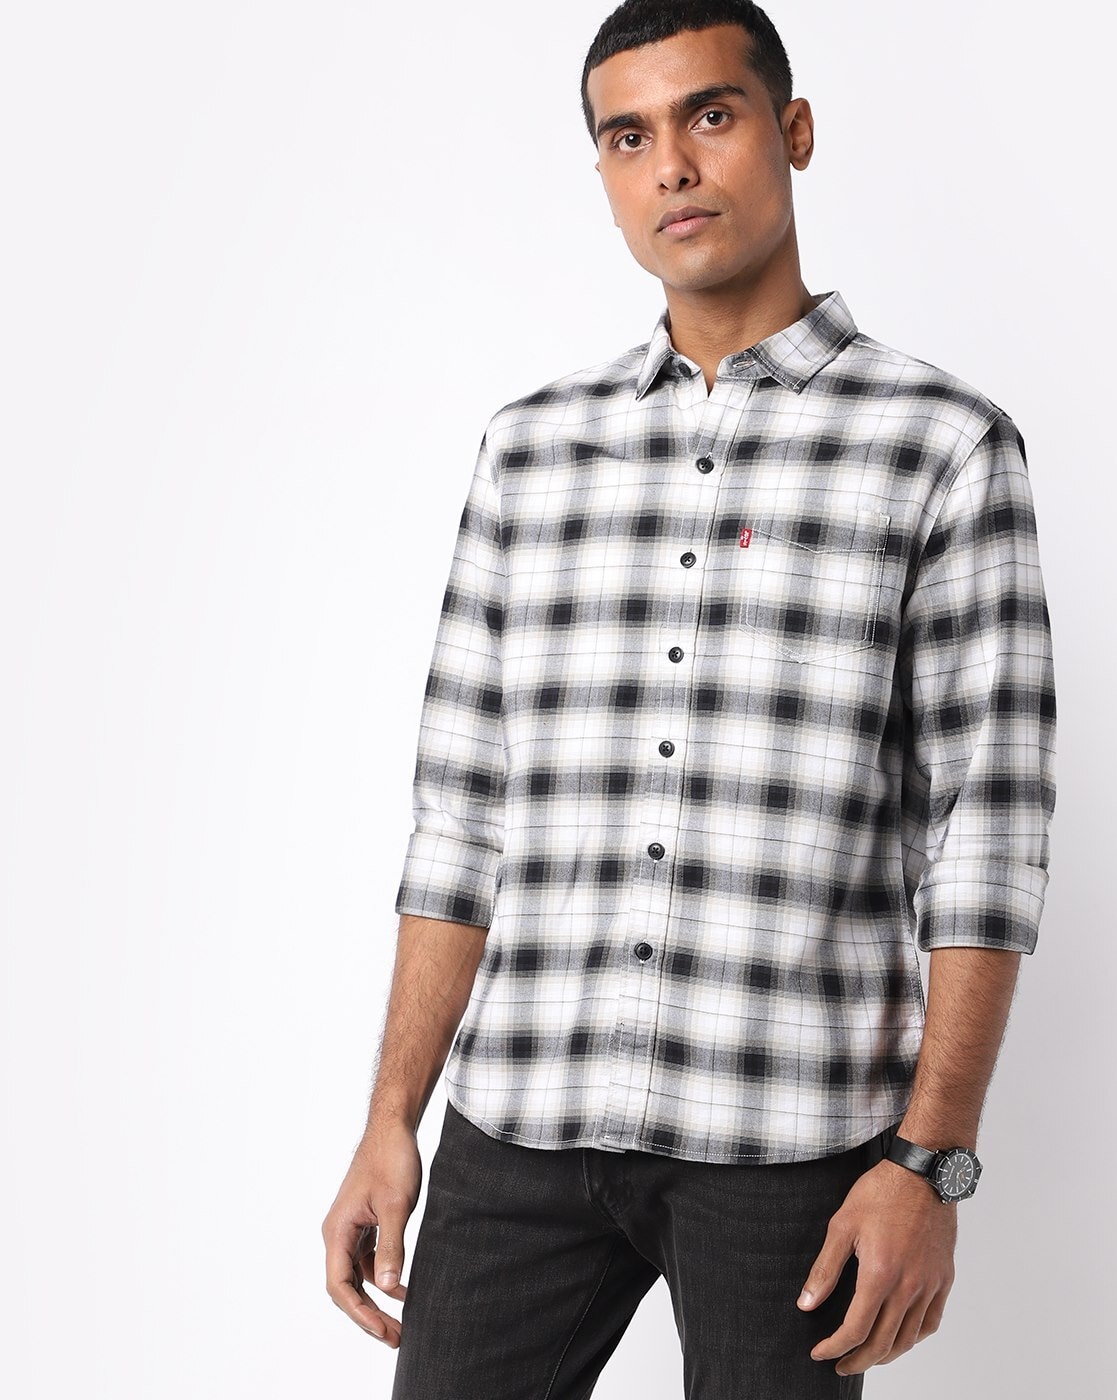 Top 33+ imagen levi’s black and white check shirt